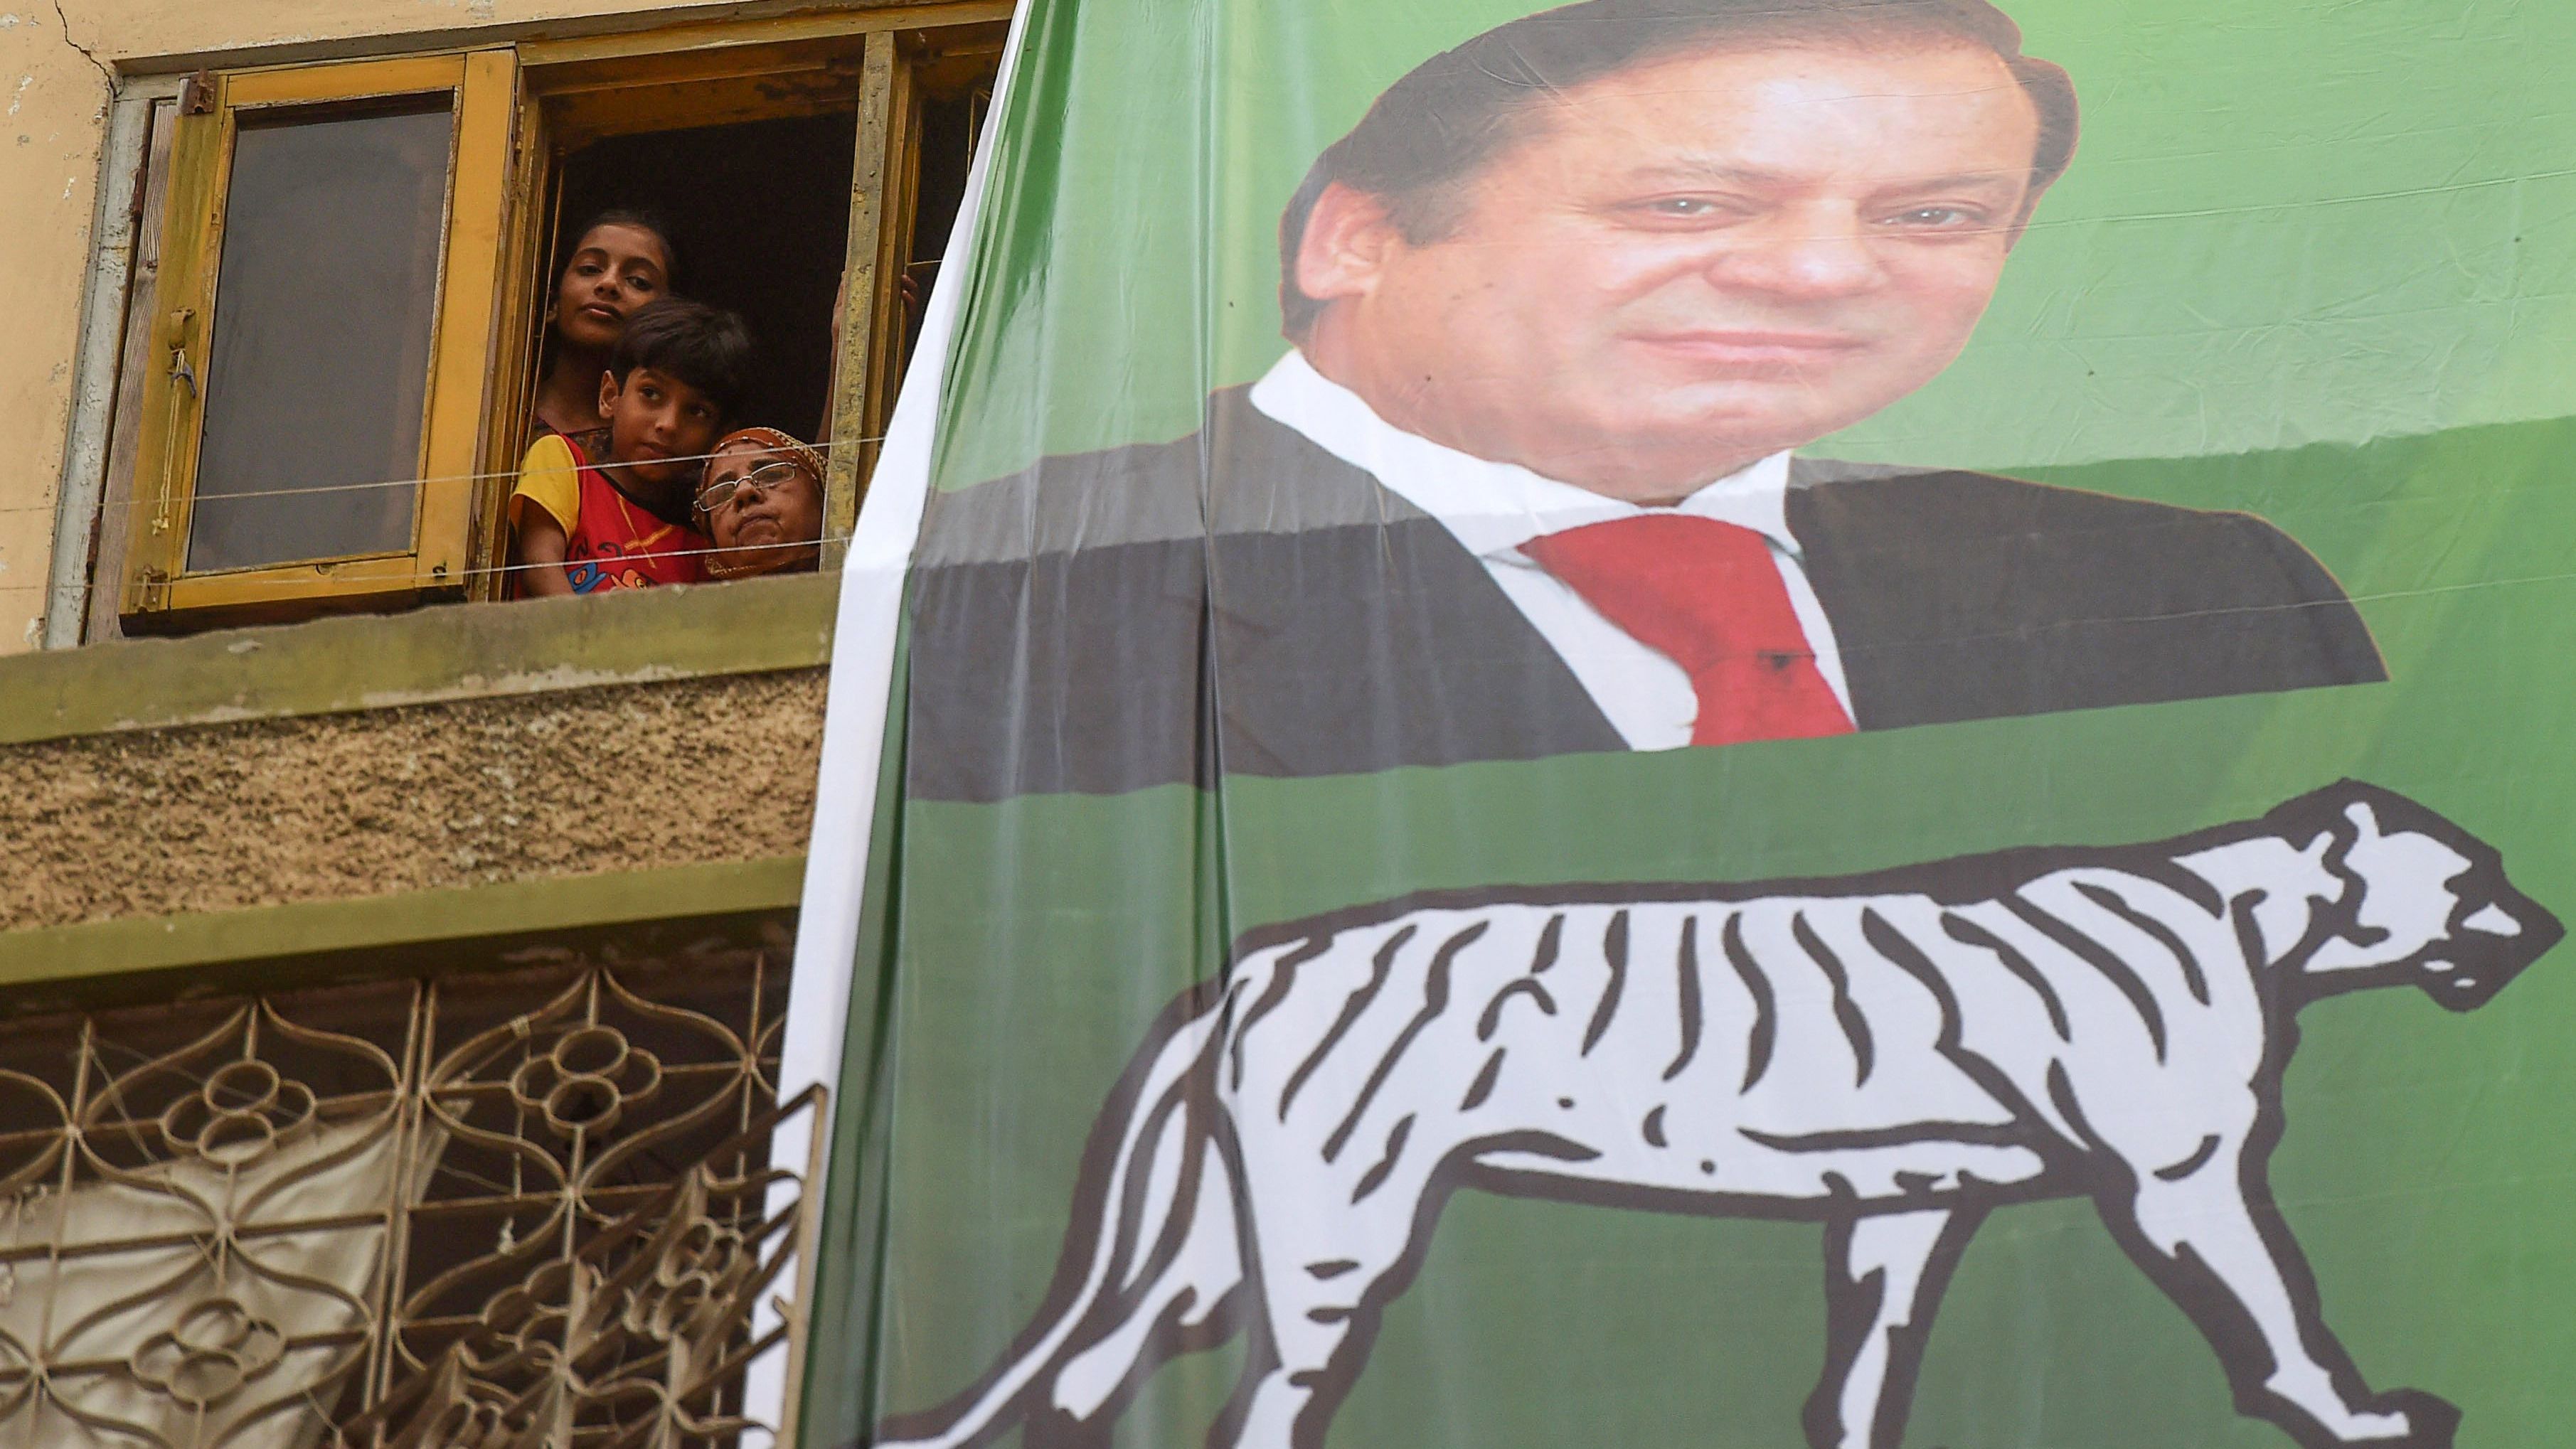 People look from a window next to an election banner featuring ousted prime minister Nawaz Sharif during a campaign event by his brother Shahbaz Sharif, head of Pakistan Muslim League -Nawaz (PML-N), in Karachi on June 26, 2018.